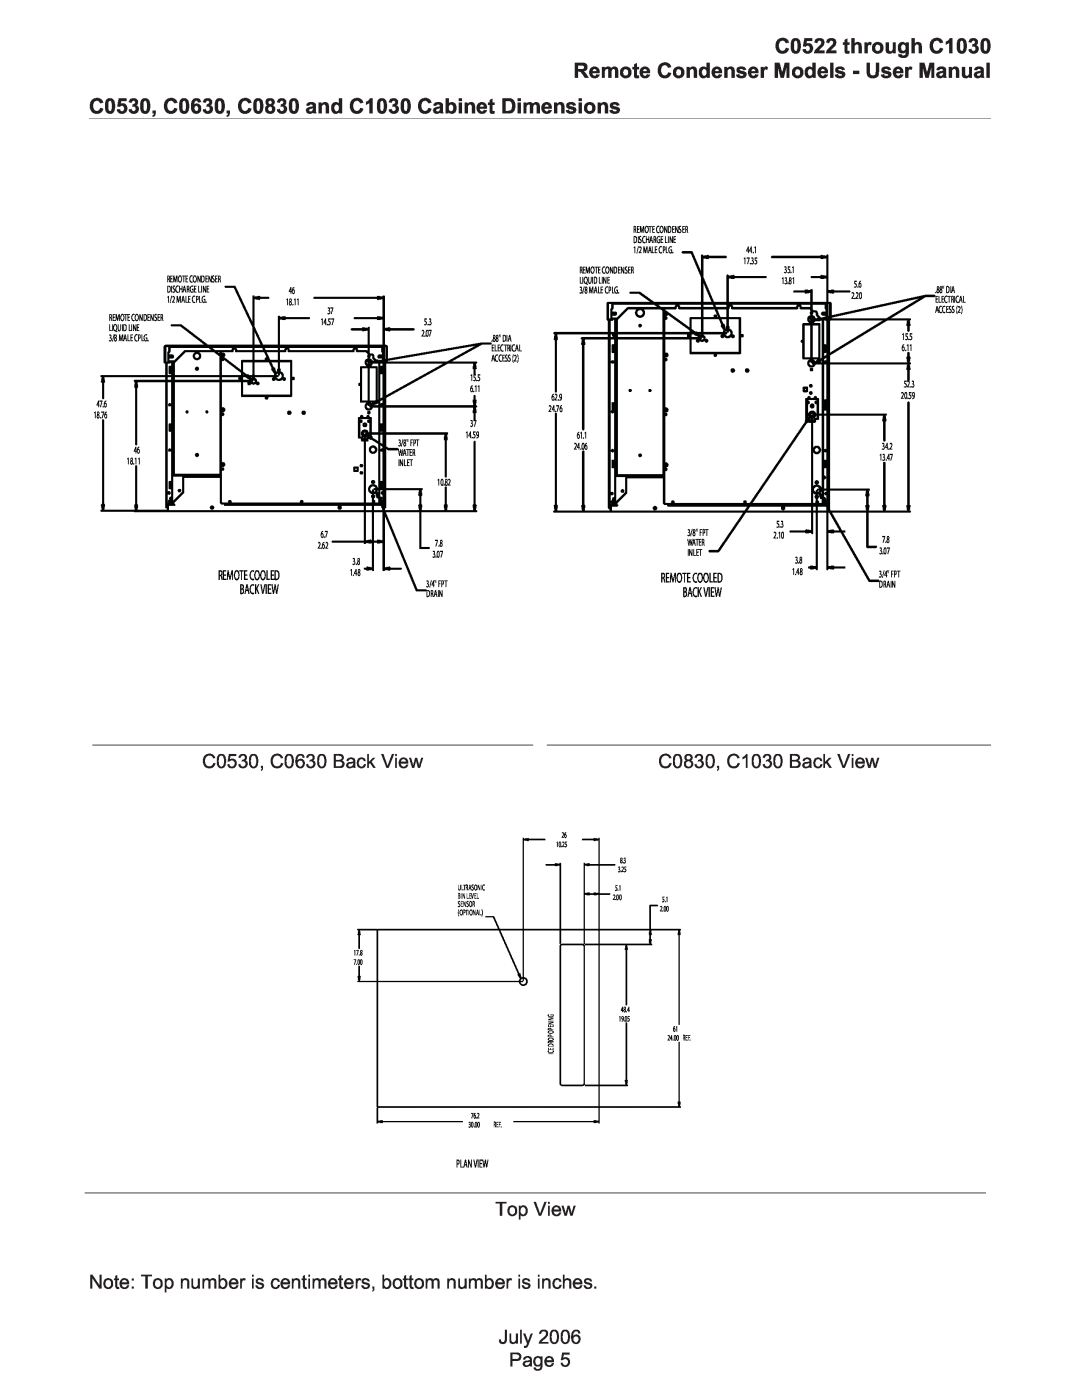 Scotsman Ice C0830, C0530 C0522 through C1030 Remote Condenser Models - User Manual, Remote Cooled, Back View, Plan View 